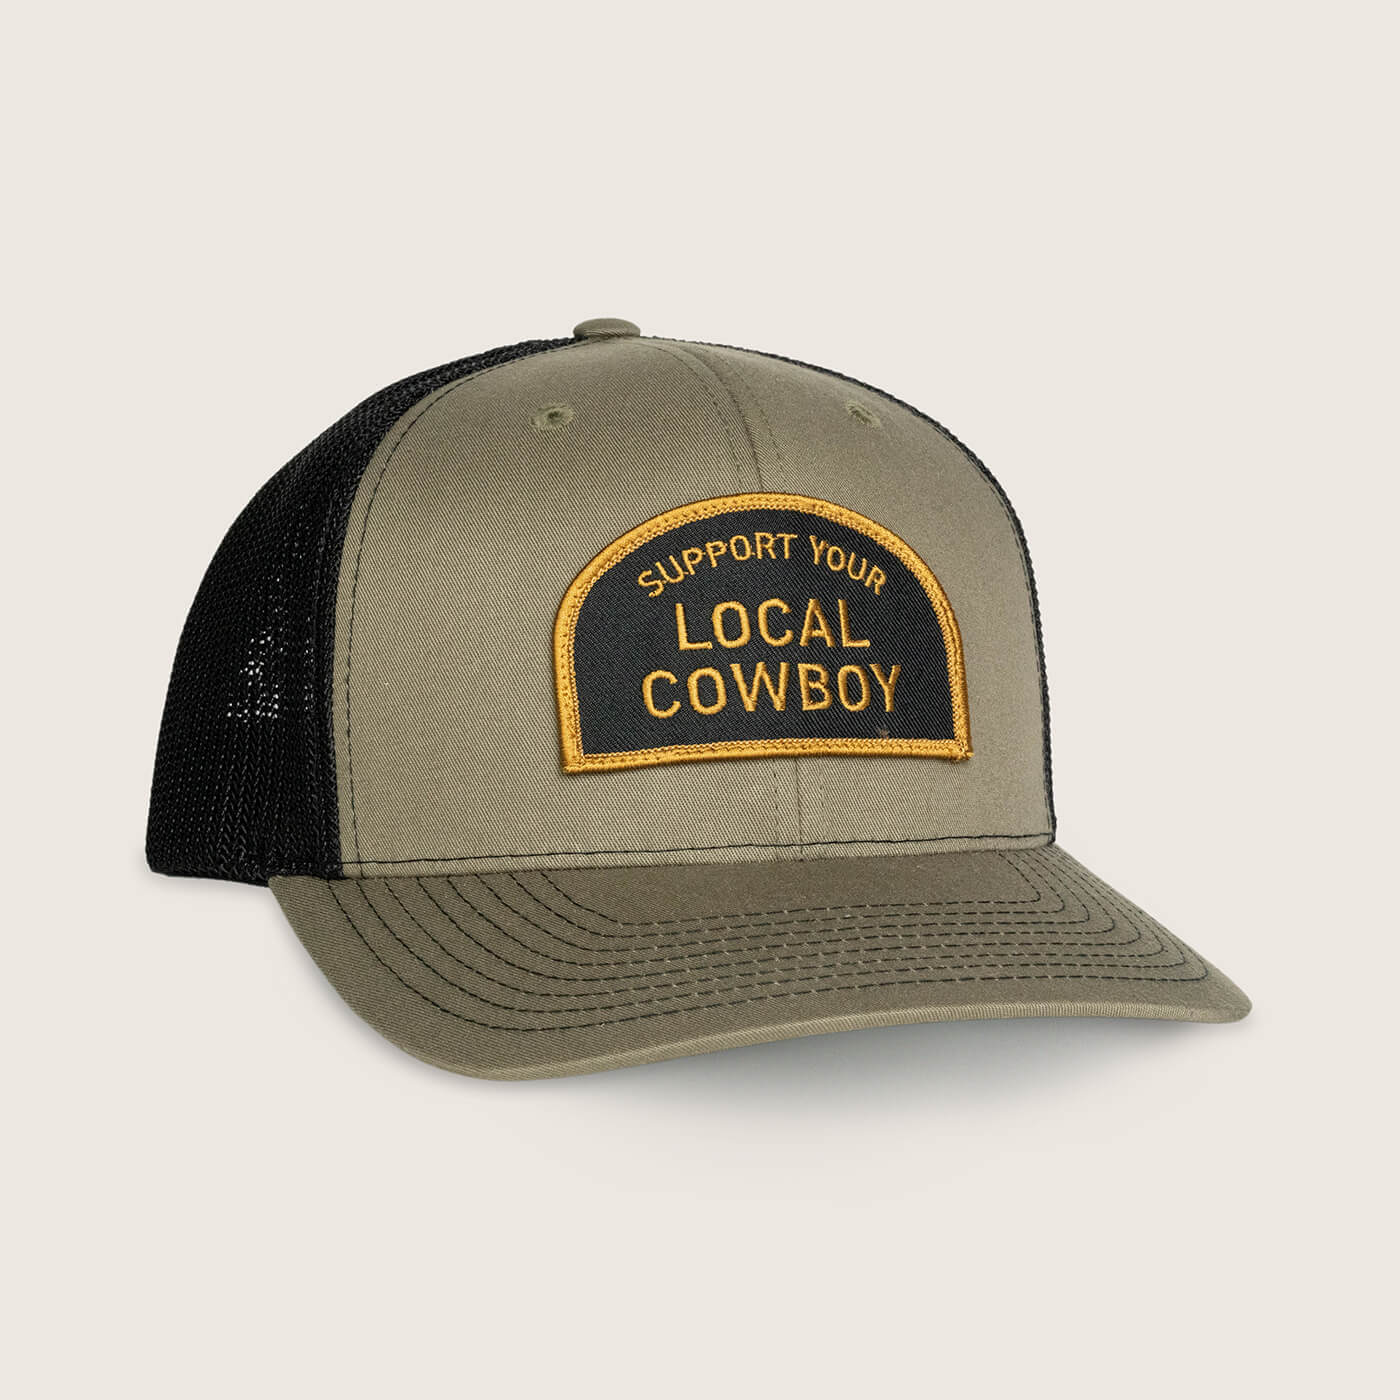 Cowboy Cool Hats OS Support Your Local Cowboy Hat